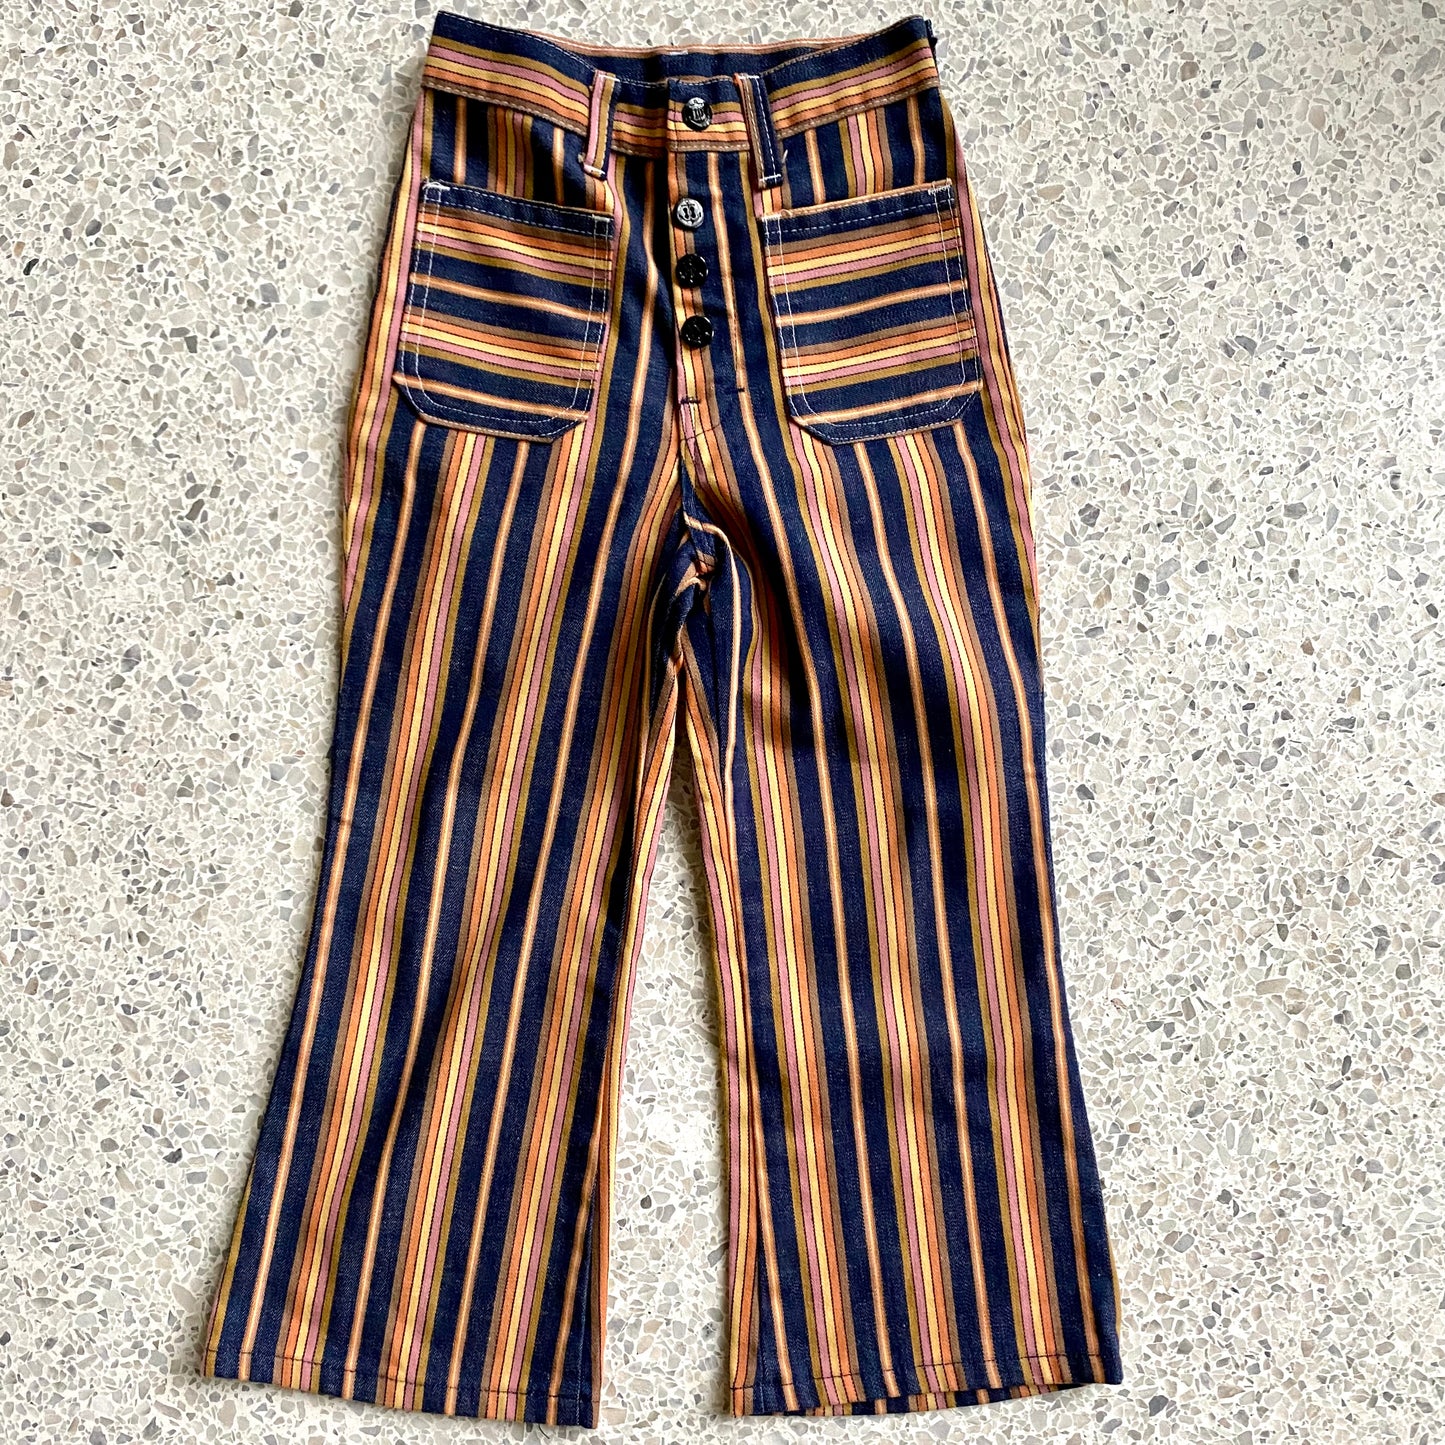 Late 60s/ Early 70s Sears Girls Bell Bottom Pants